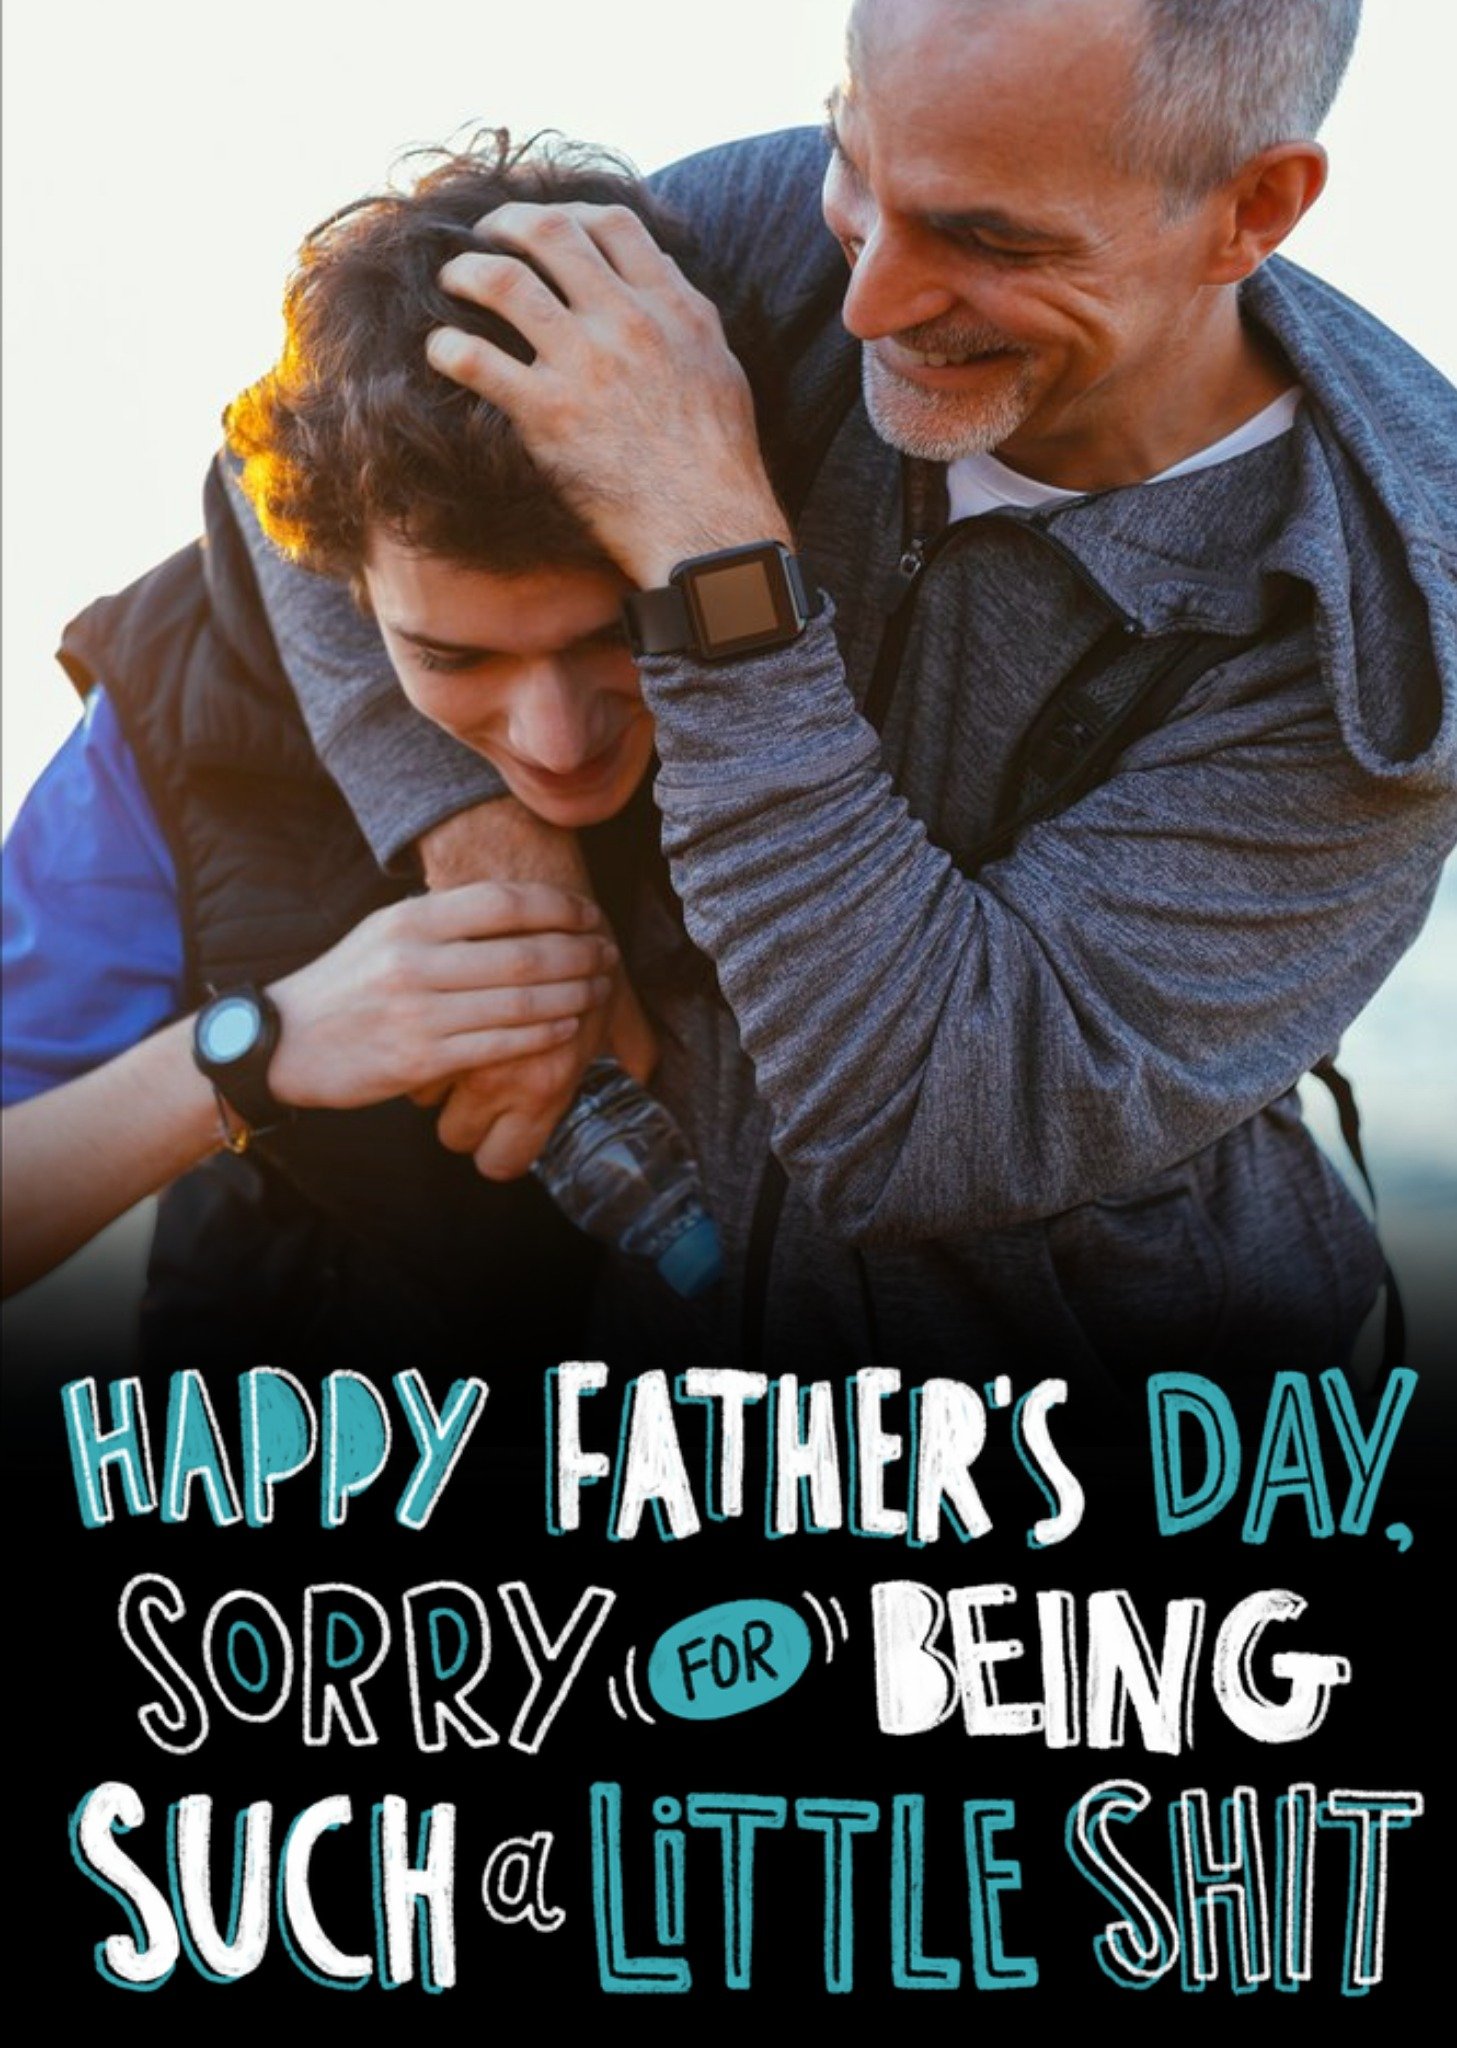 Moonpig Sorry For Being Such A Little Sh*t Funny Father's Day Photo Card Ecard